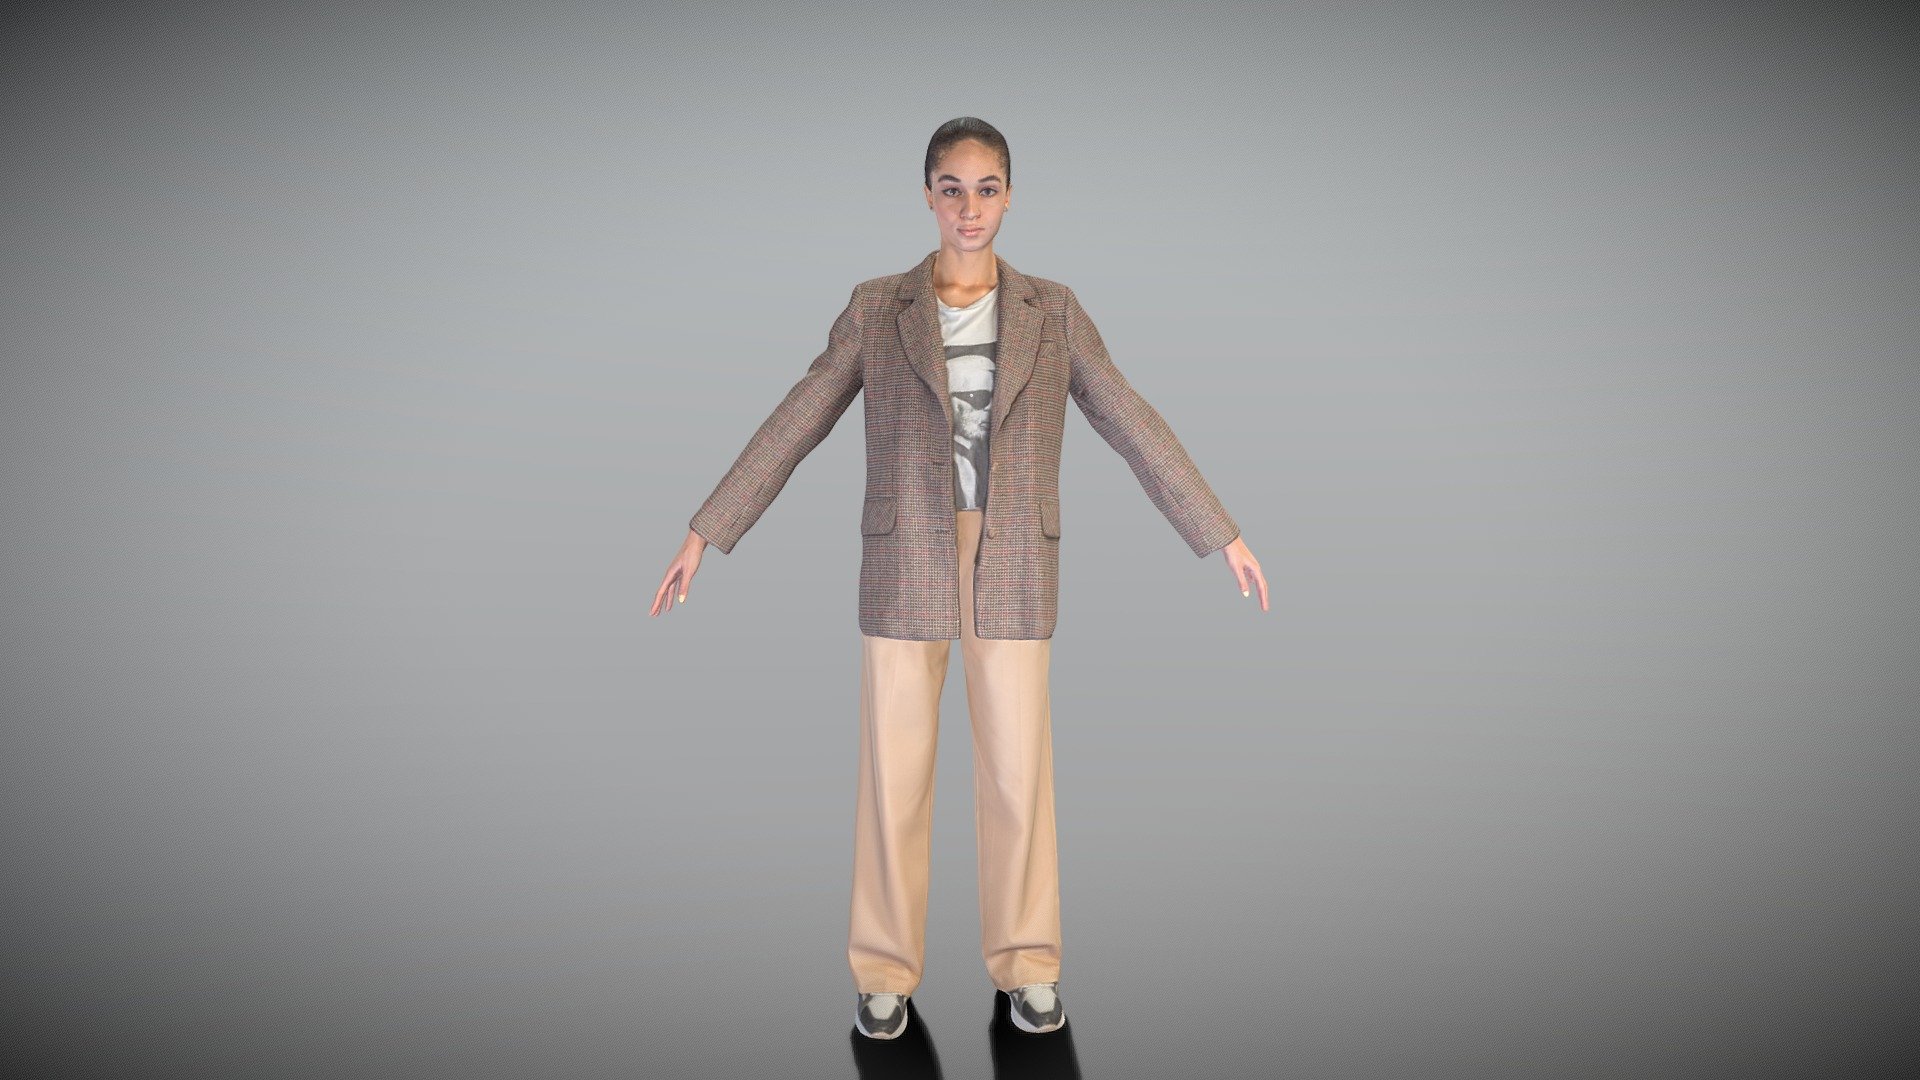 This is a true human size detailed model of a beautiful young woman of Caucasian appearance dressed in business style. The model is captured in the A-pose with mesh ready for rigging and animation in all most usable 3d software.

Technical specifications:




digital double scan model

low-poly model

high-poly model (.ztl tool with 5-6 subdivisions) clean and retopologized automatically via ZRemesher

fully quad topology

sufficiently clean

edge Loops based

ready for subdivision

8K texture color map

non-overlapping UV map

ready for animation

PBR textures 8K resolution: Normal, Displacement, Albedo maps

Download package includes a Cinema 4D project file with Redshift shader, OBJ, FBX, STL files, which are applicable for 3ds Max, Maya, Unreal Engine, Unity, Blender, etc. All the textures you will find in the “Tex” folder, included into the main archive.

3D EVERYTHING

Stand with Ukraine! - Young elegant woman ready for animation 452 - Buy Royalty Free 3D model by deep3dstudio 3d model